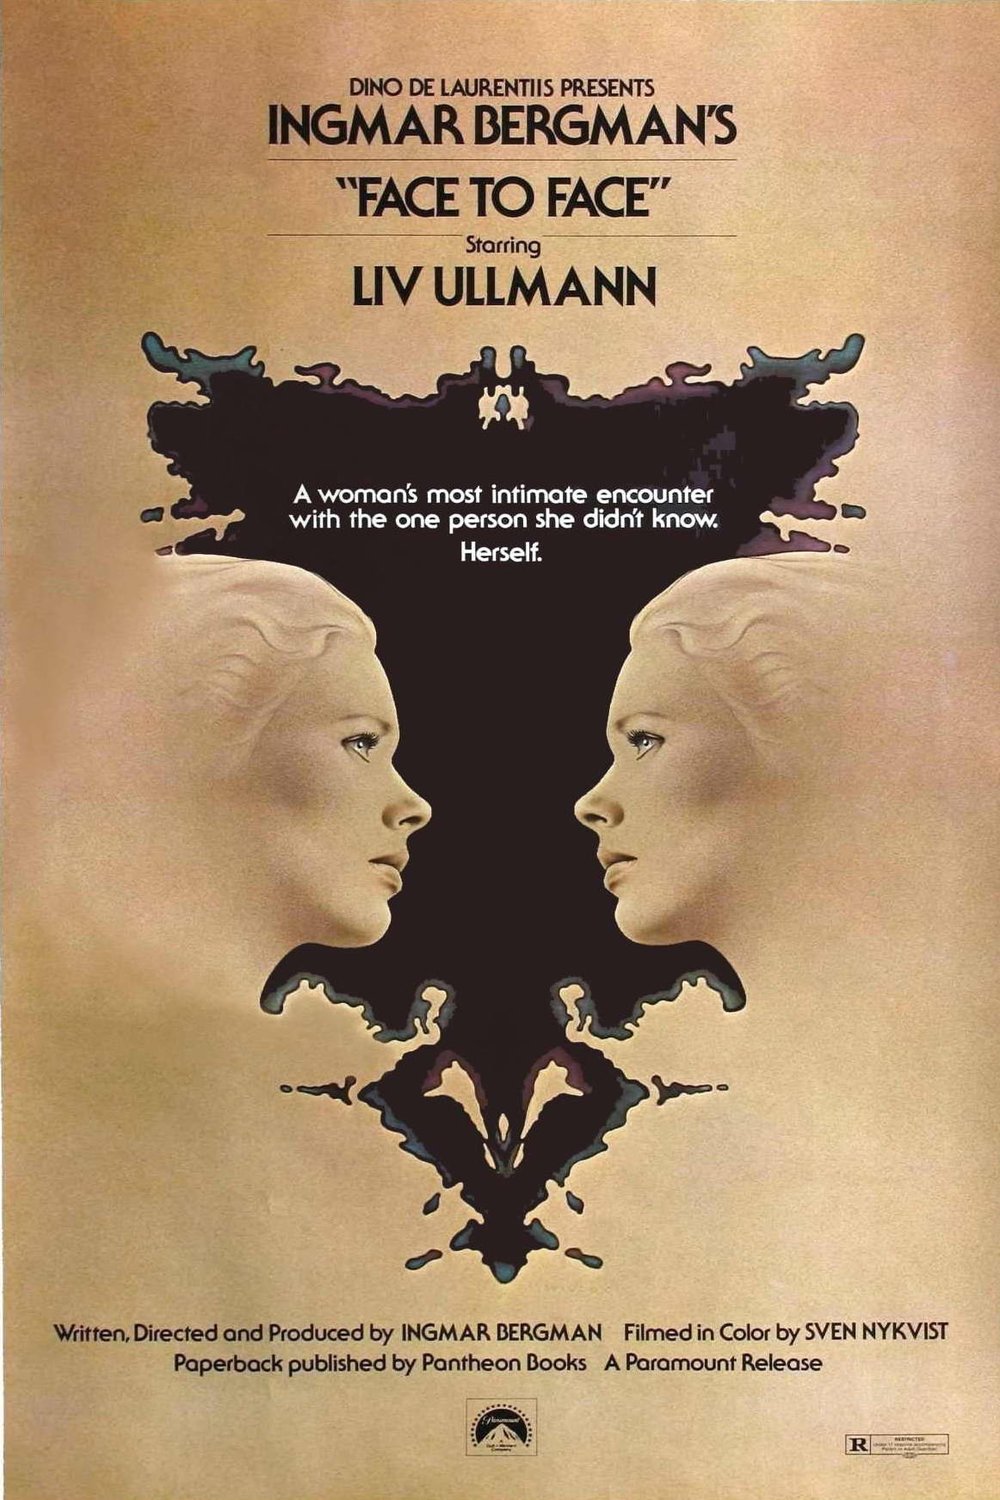 Swedish poster of the movie Face to Face